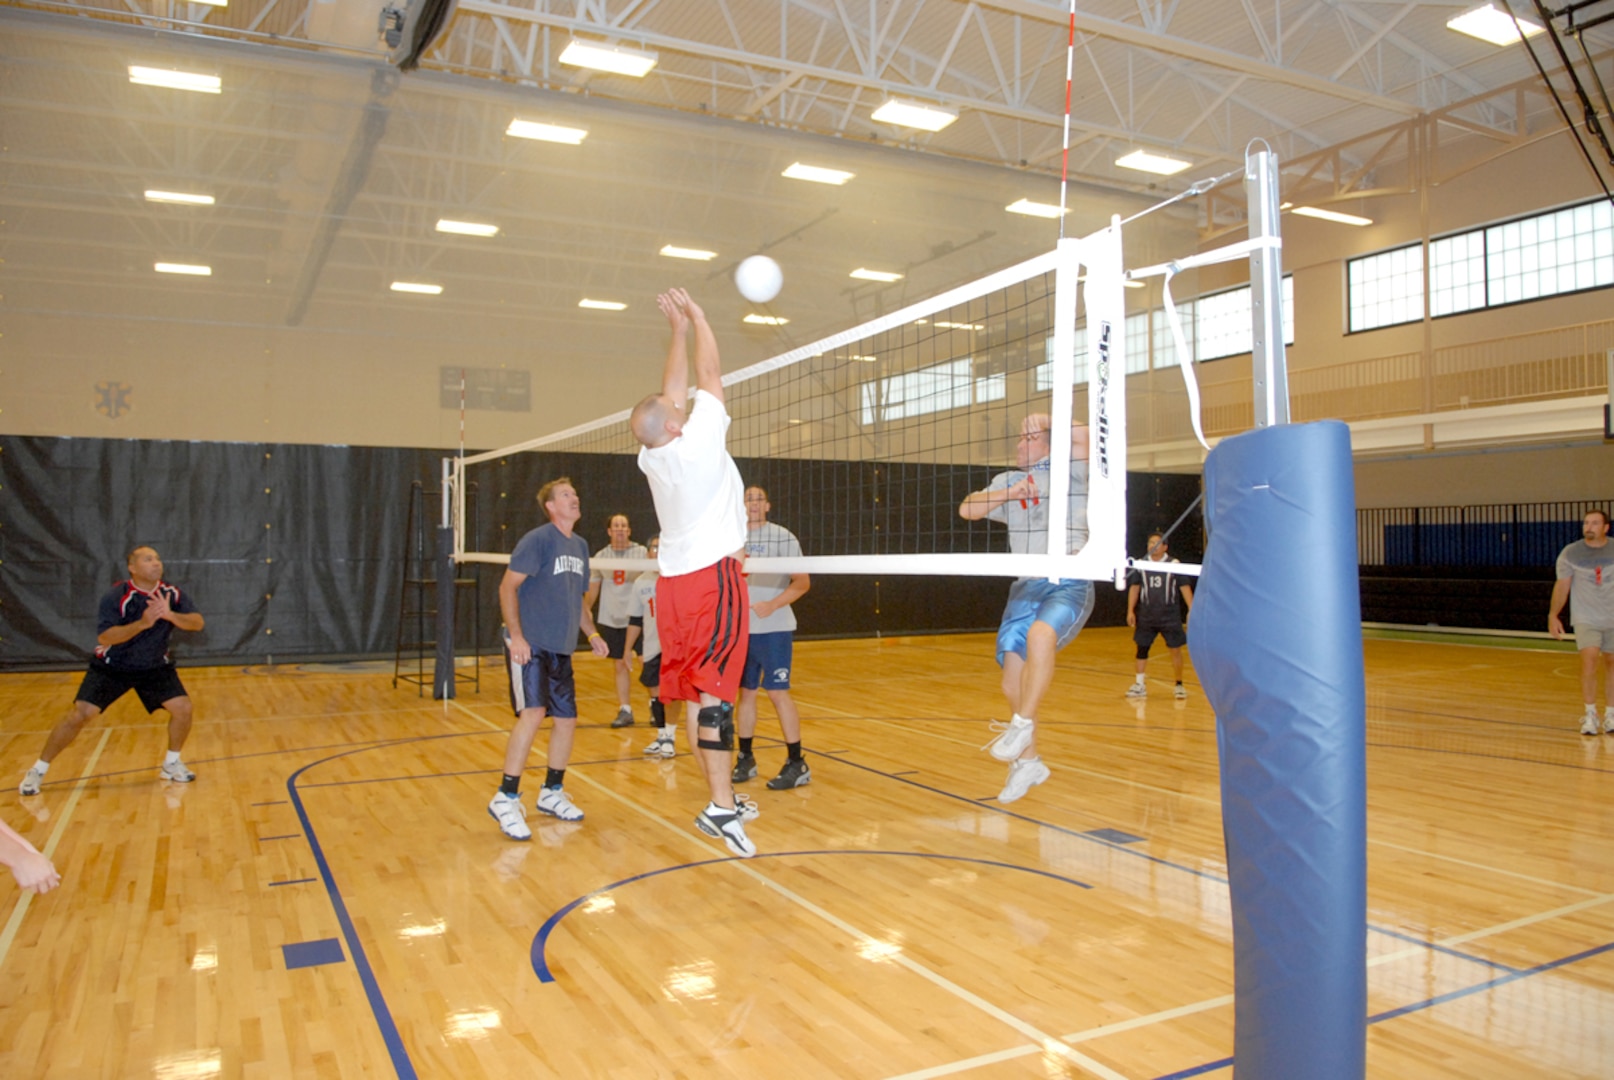 Air Education and Training Command’s Mark Baer blocks a shot at the net against the 12th Communications Squadron during the intramural volleyball championship June 21. (U.S. Air Force photo by Rich McFadden)